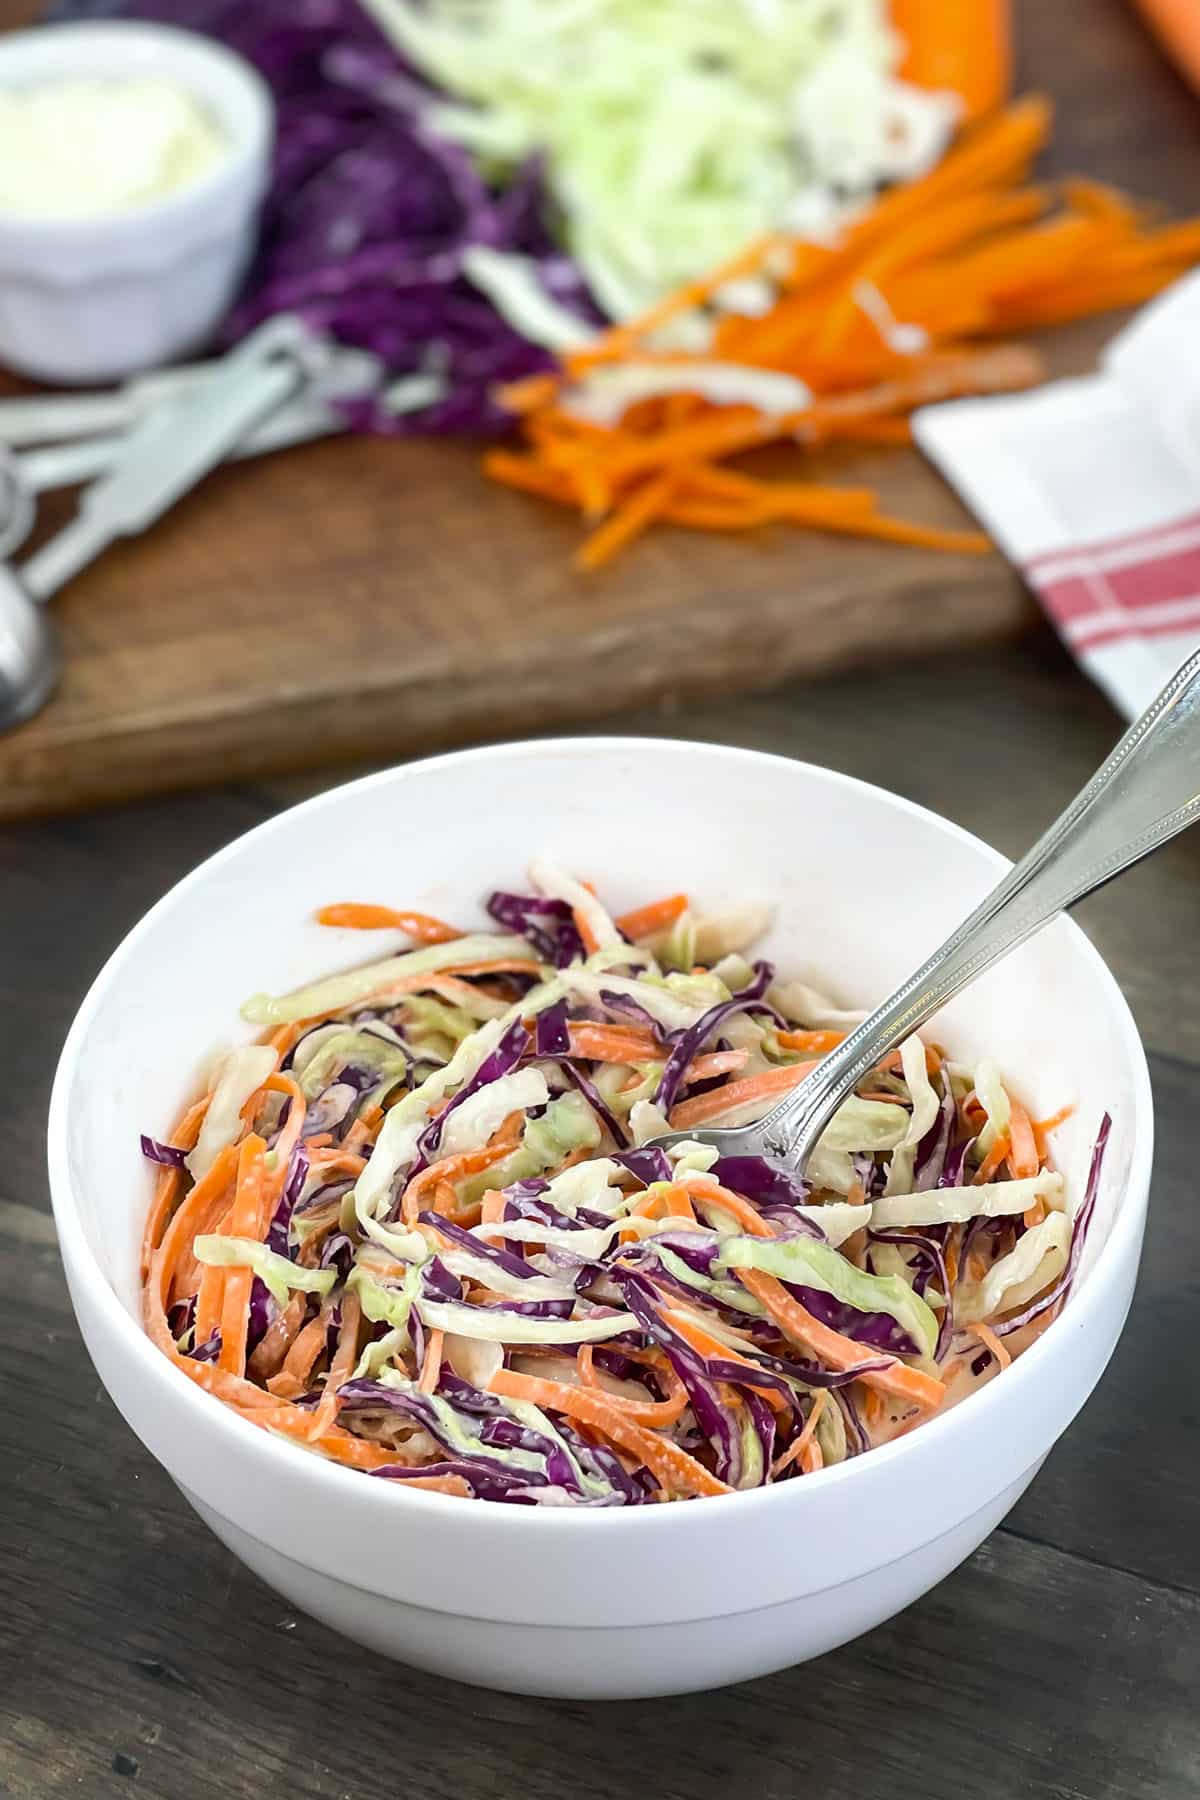 The Perfect Coleslaw For Pulled Pork